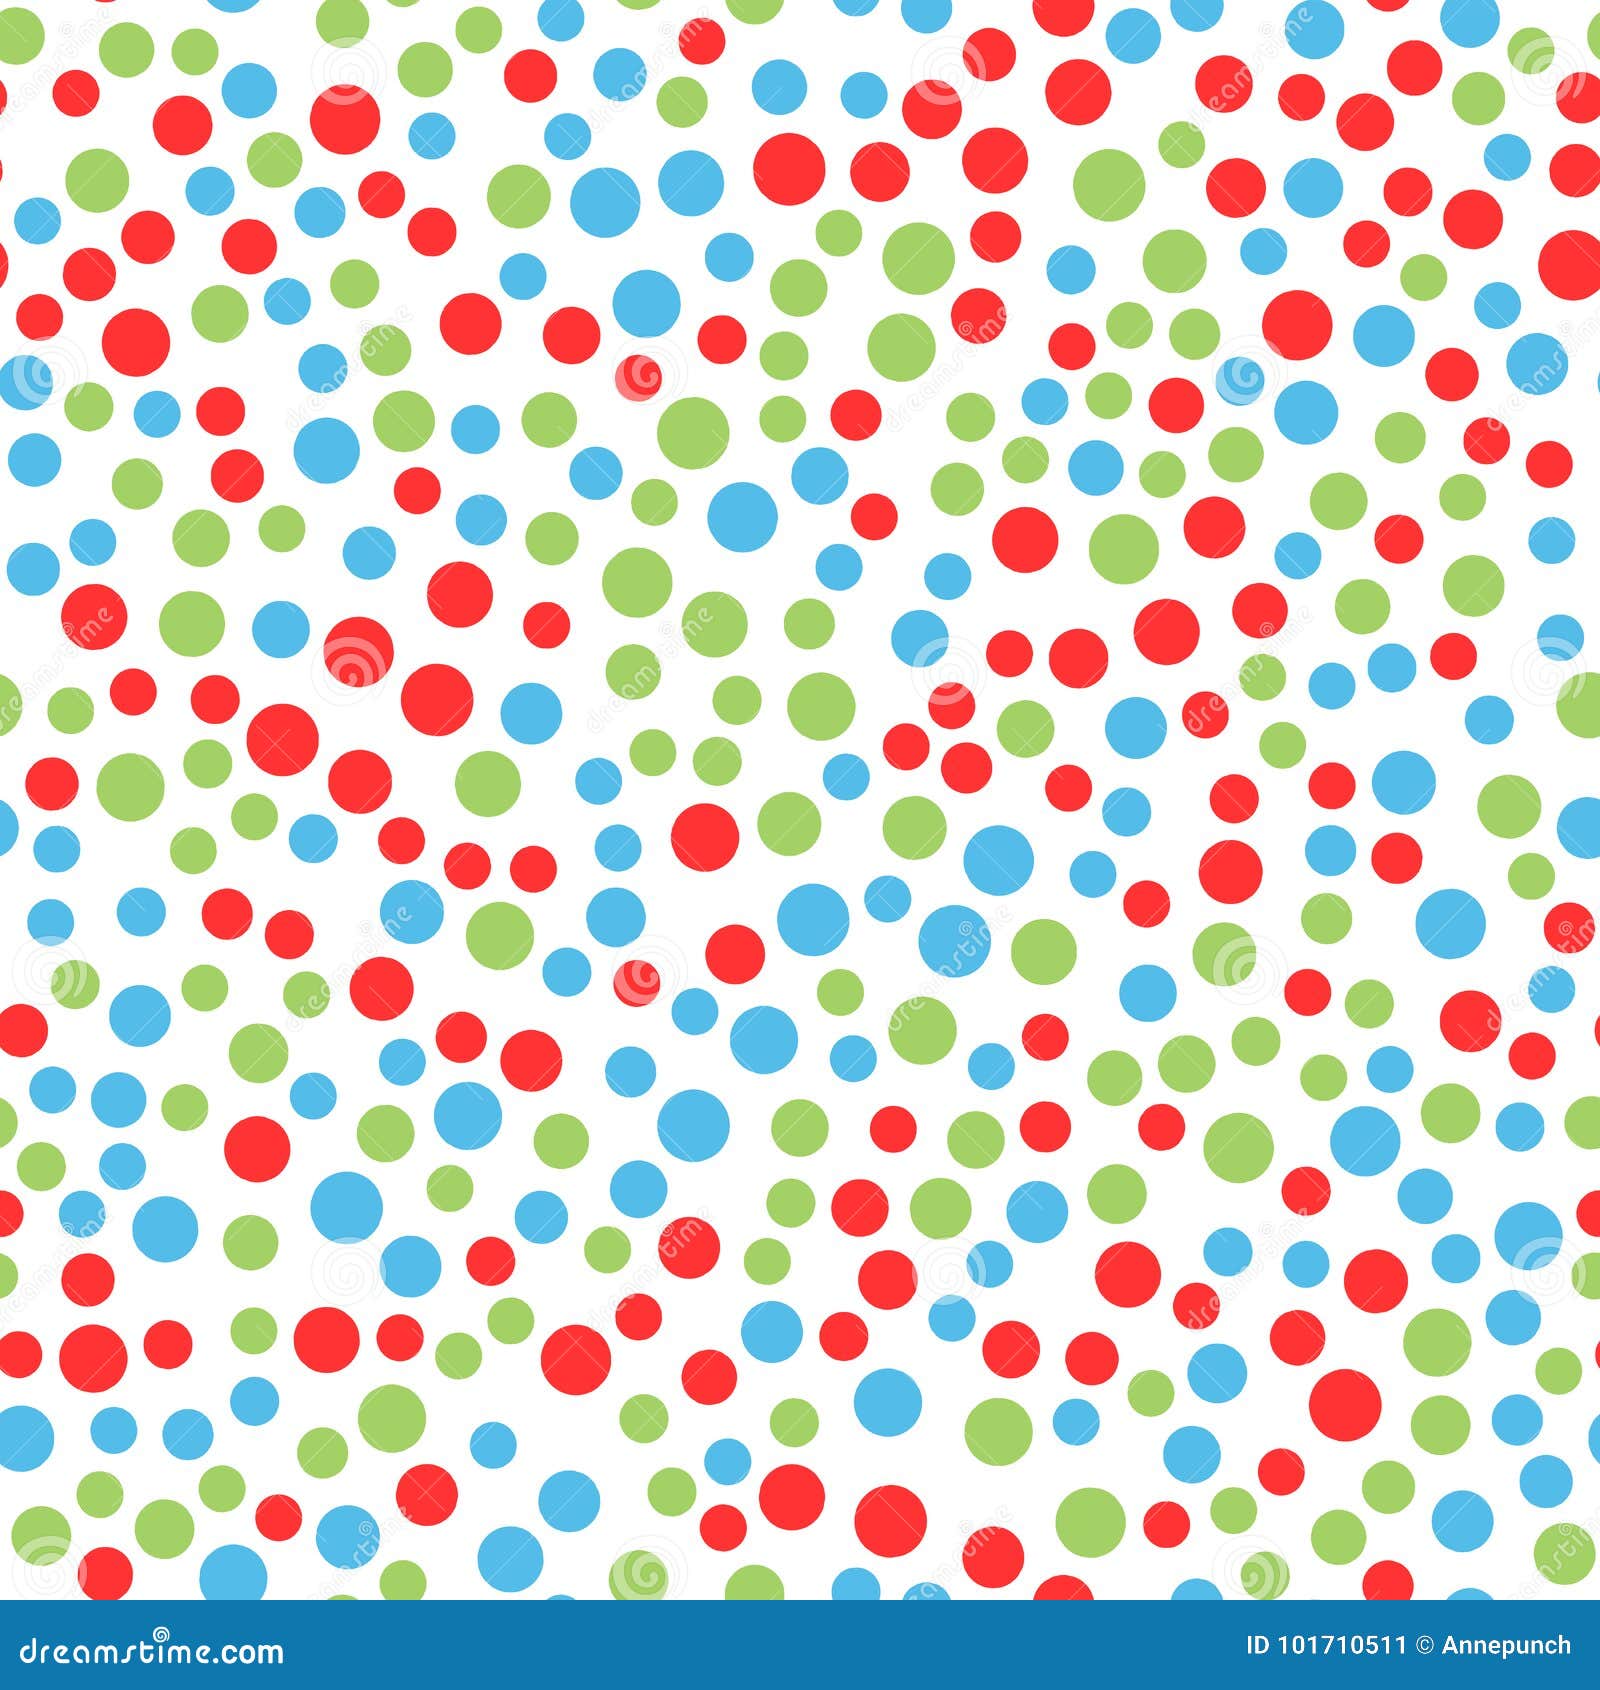 Red, Green, Blue Round Dots on White Background. Bright Seamless ...